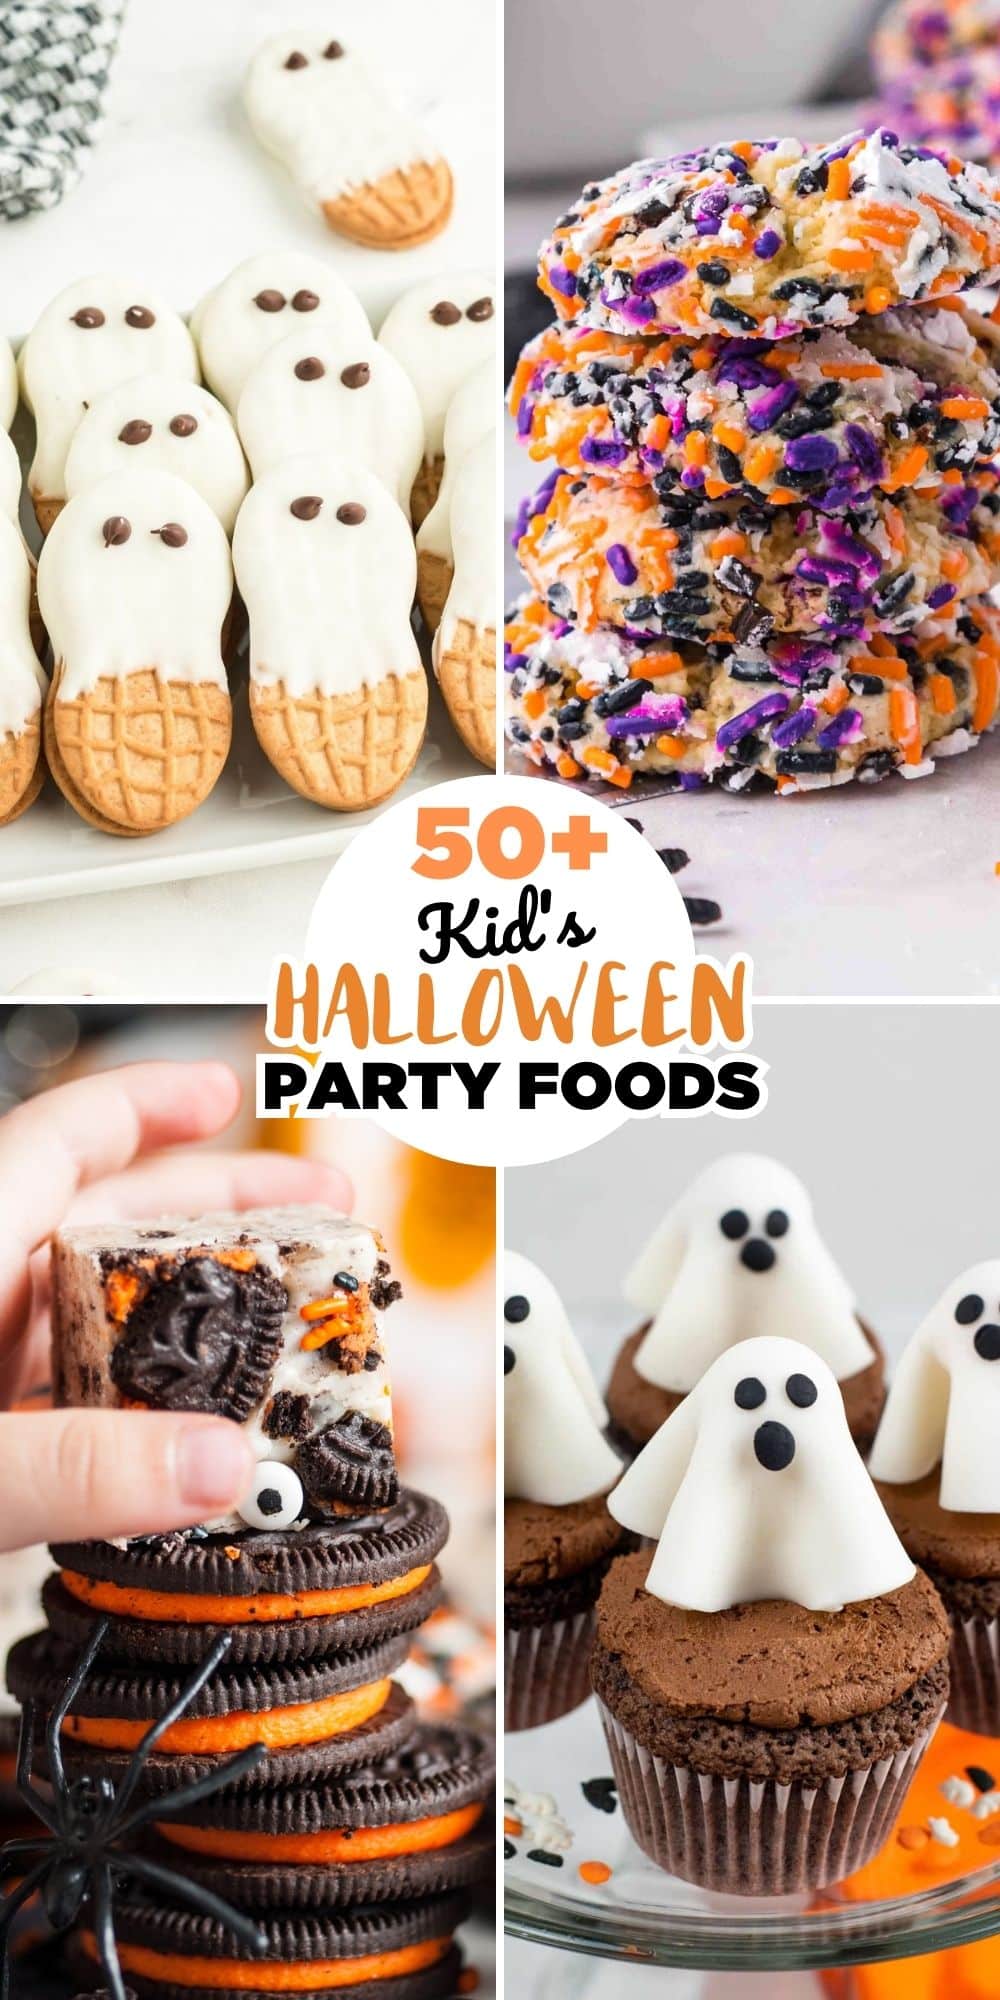 This collection of the best Kids Halloween Party Food Recipes includes everything from ghoulish appetizers and creepy beverages to spooktacular sweet treats and more! These delicious and creative ideas are sure to make any Halloween night a huge success! 